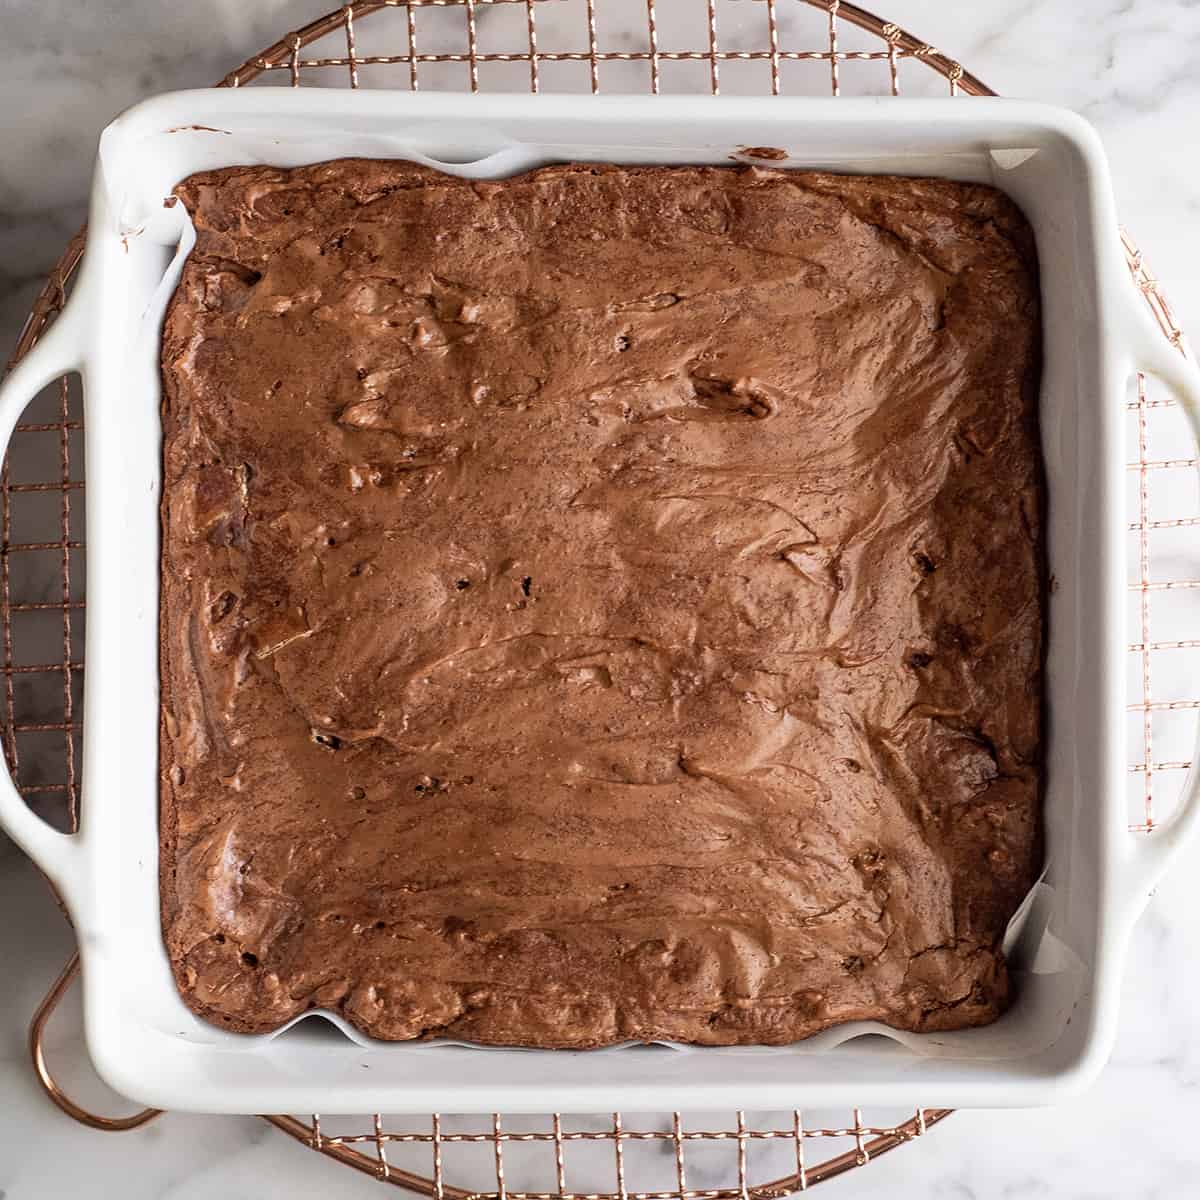 Peppermint Brownies in a baking dish after baking